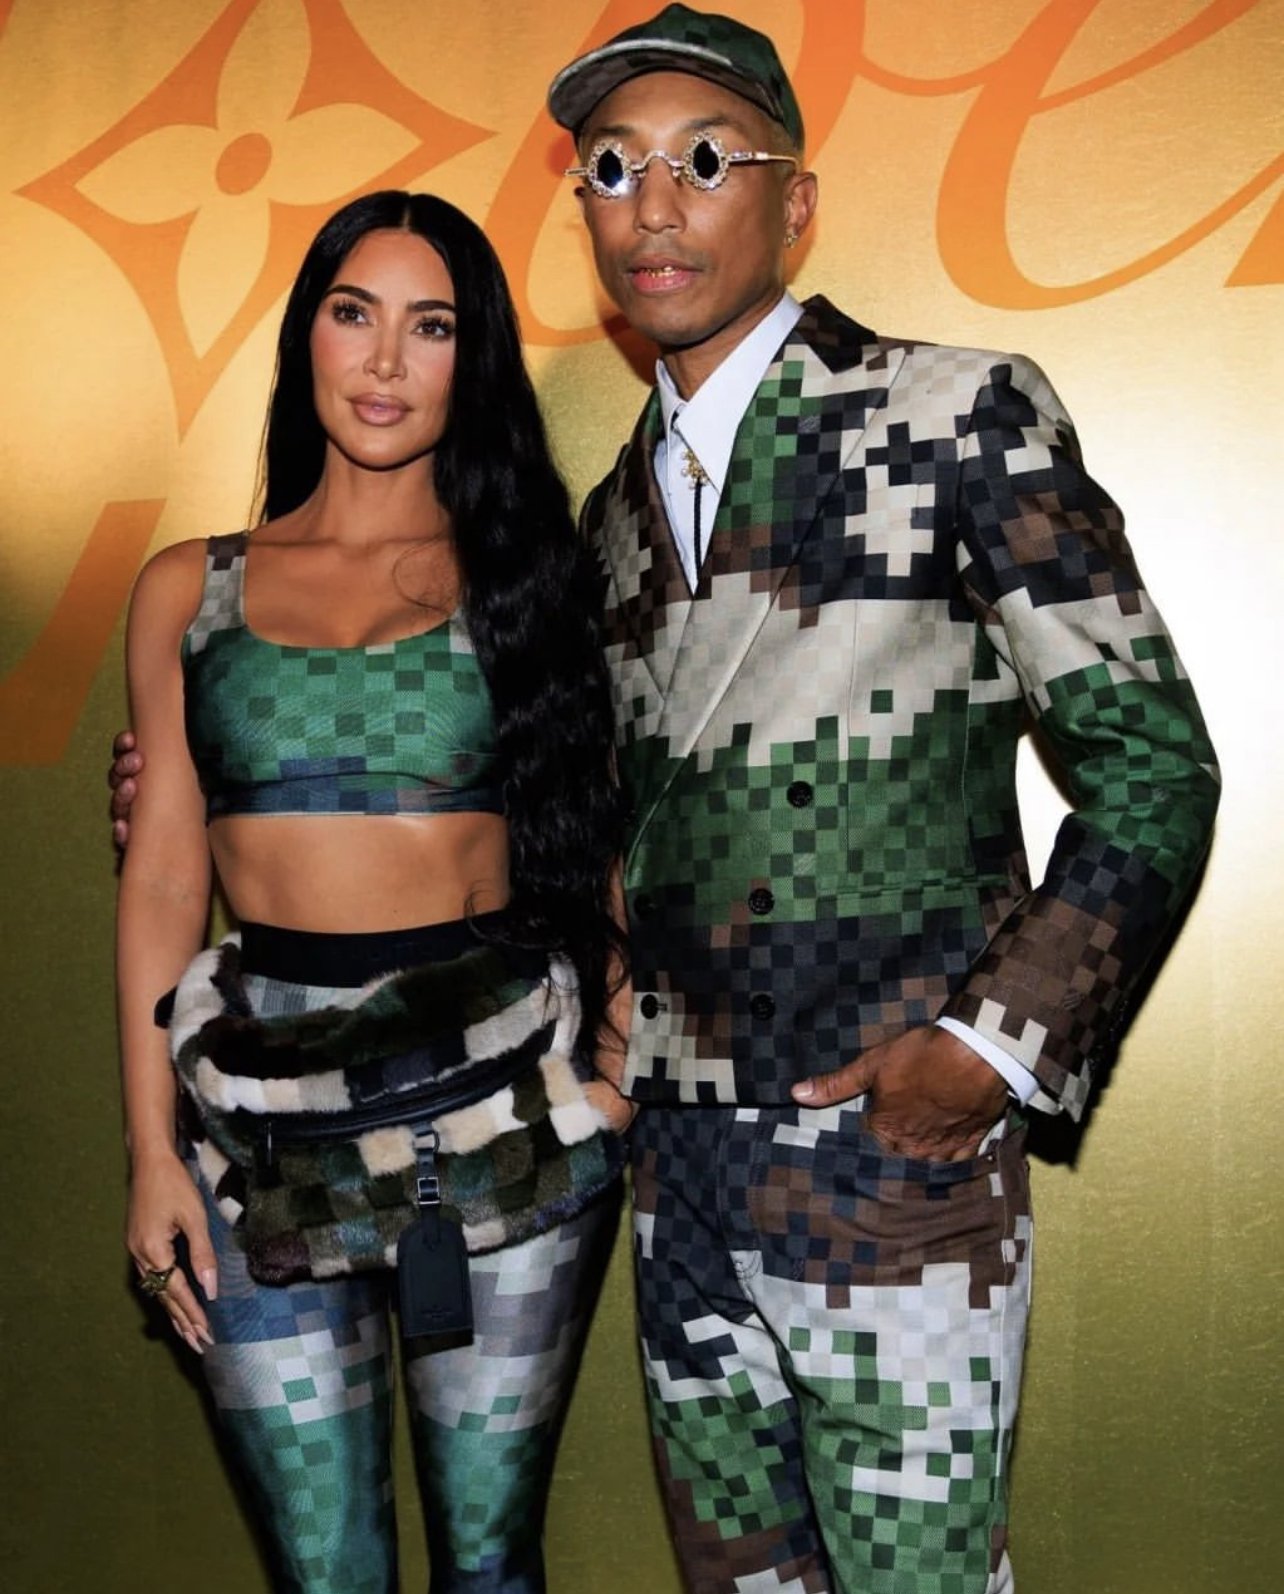 Pharrell unveils glimpse of his Louis Vuitton collection starring pregnant  Rihanna